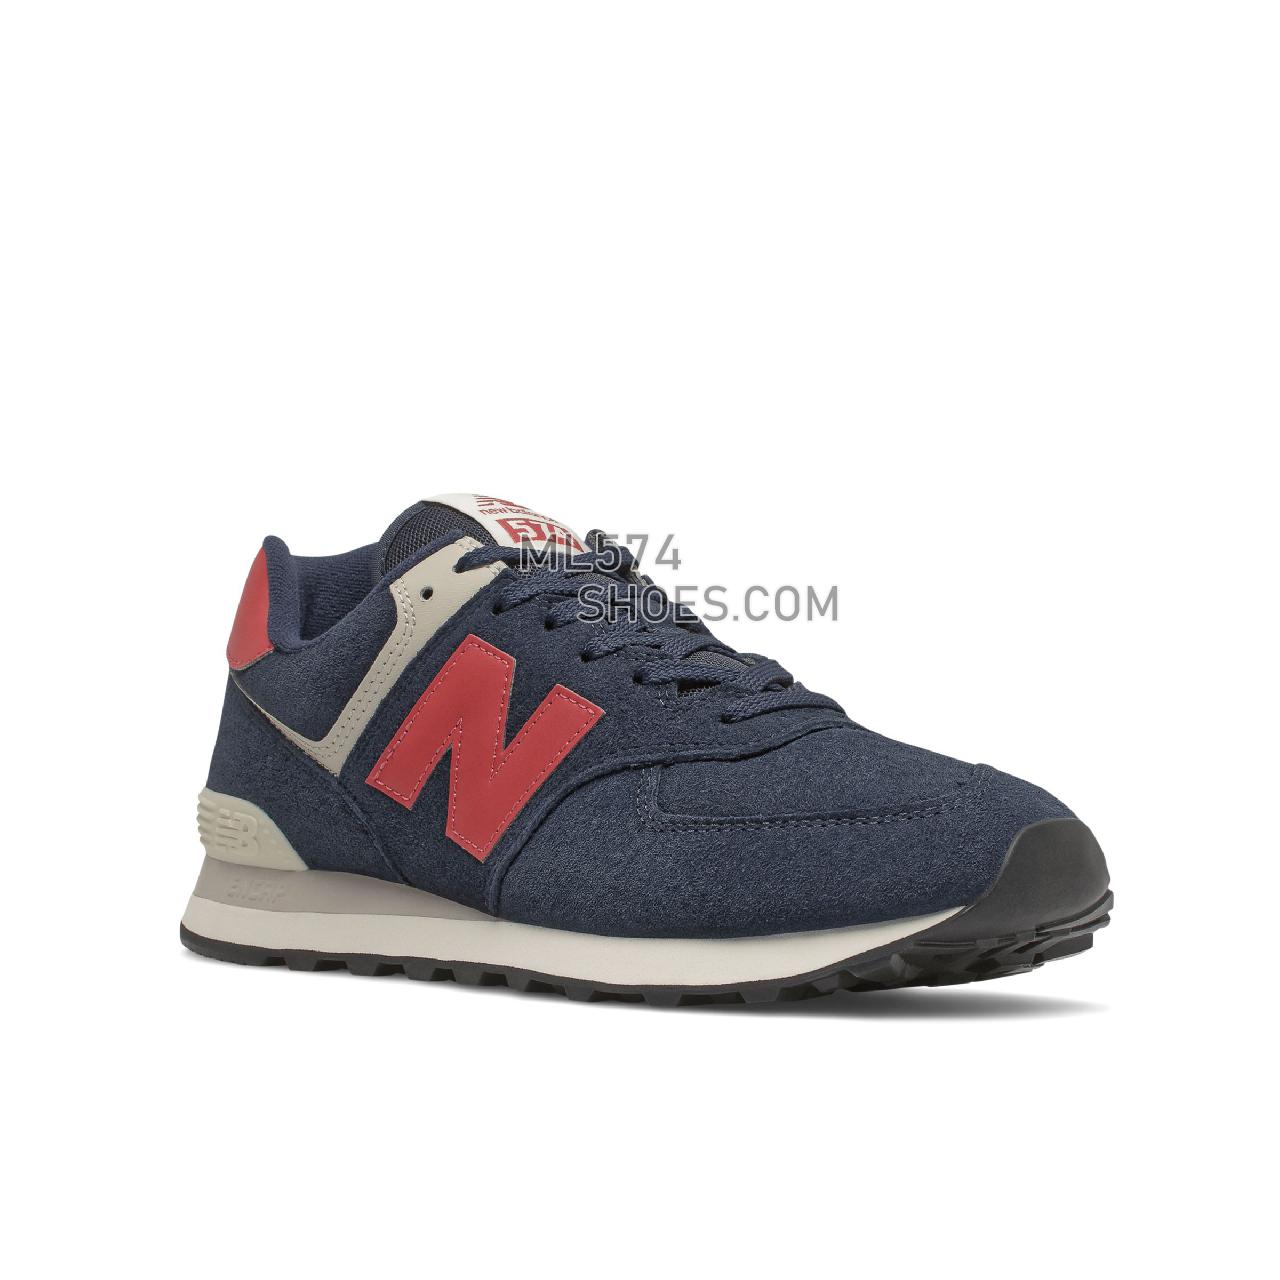 New Balance 574v2 - Men's Sport Style Sneakers - Navy with Red - ML574PN2